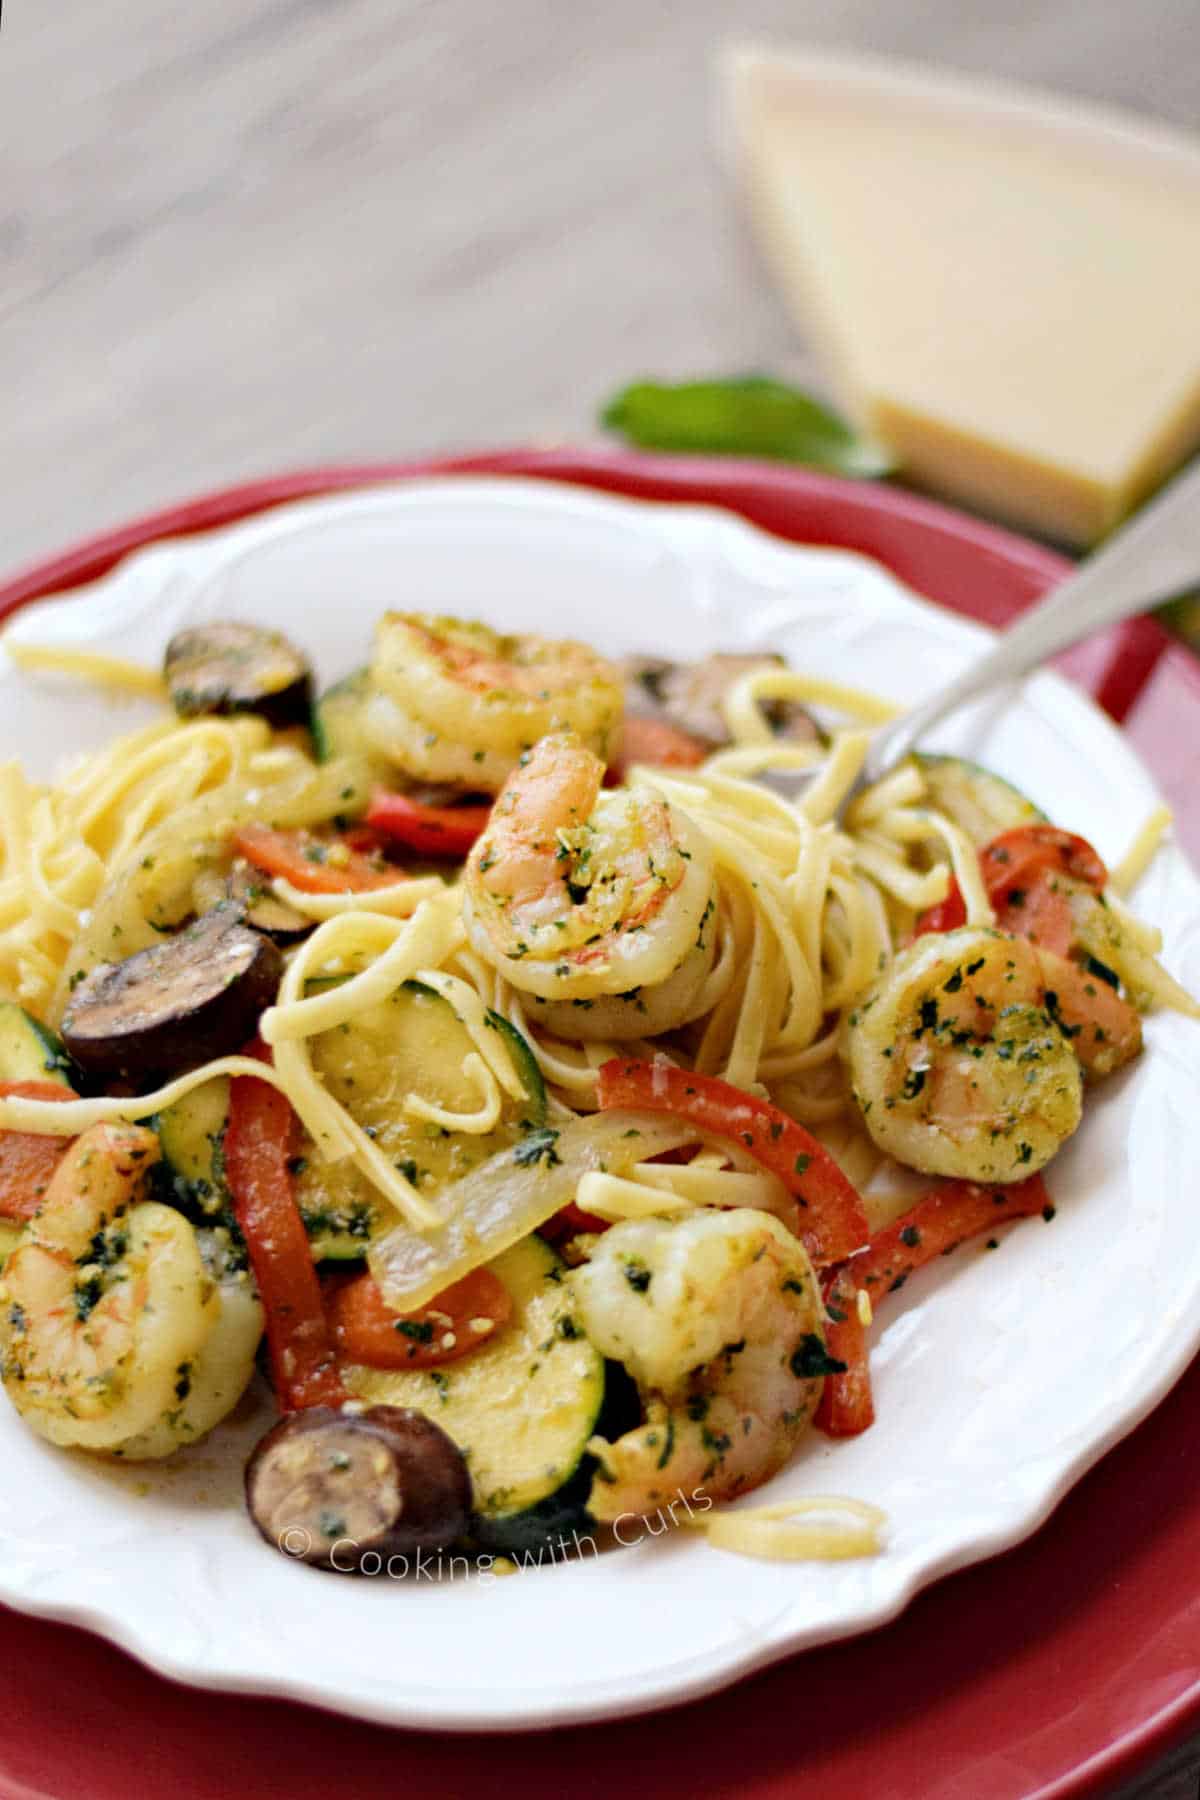 Pesto shrimp, bell pepper, zucchini, mushrooms and pasta on a plate with a wedge of parmesan in the background.